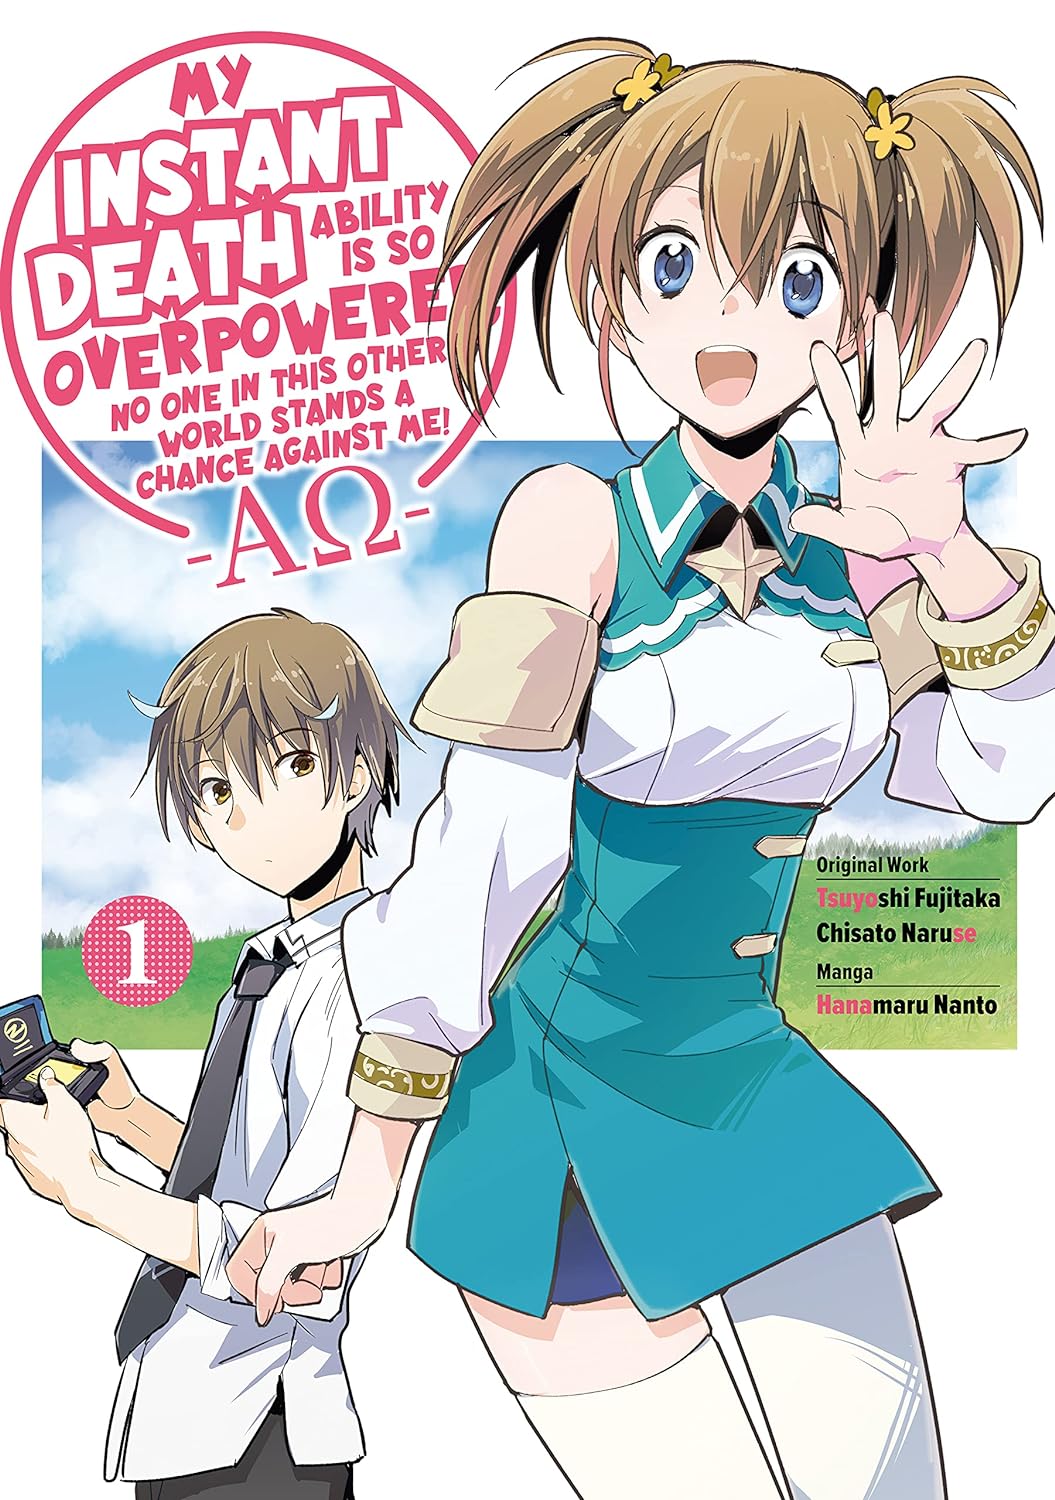 My Instant Death Ability Is So Overpowered, No One in This Other World Stands a Chance, Vol. 1 - Agenda Bookshop